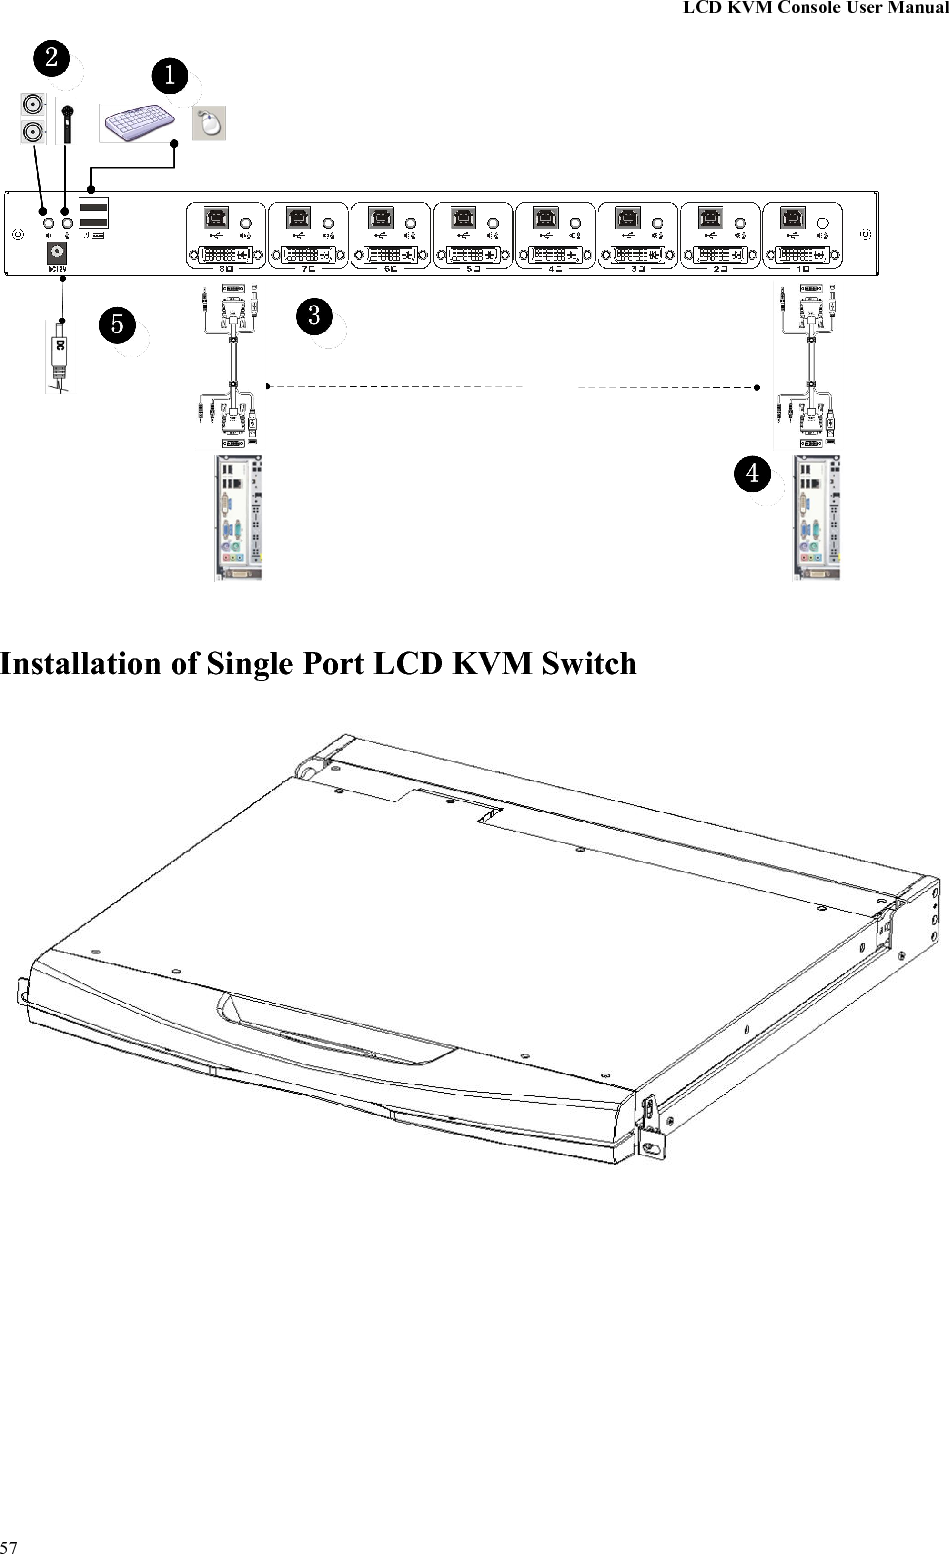 LCD KVM Console User Manual57Installation of Single Port LCD KVM Switch